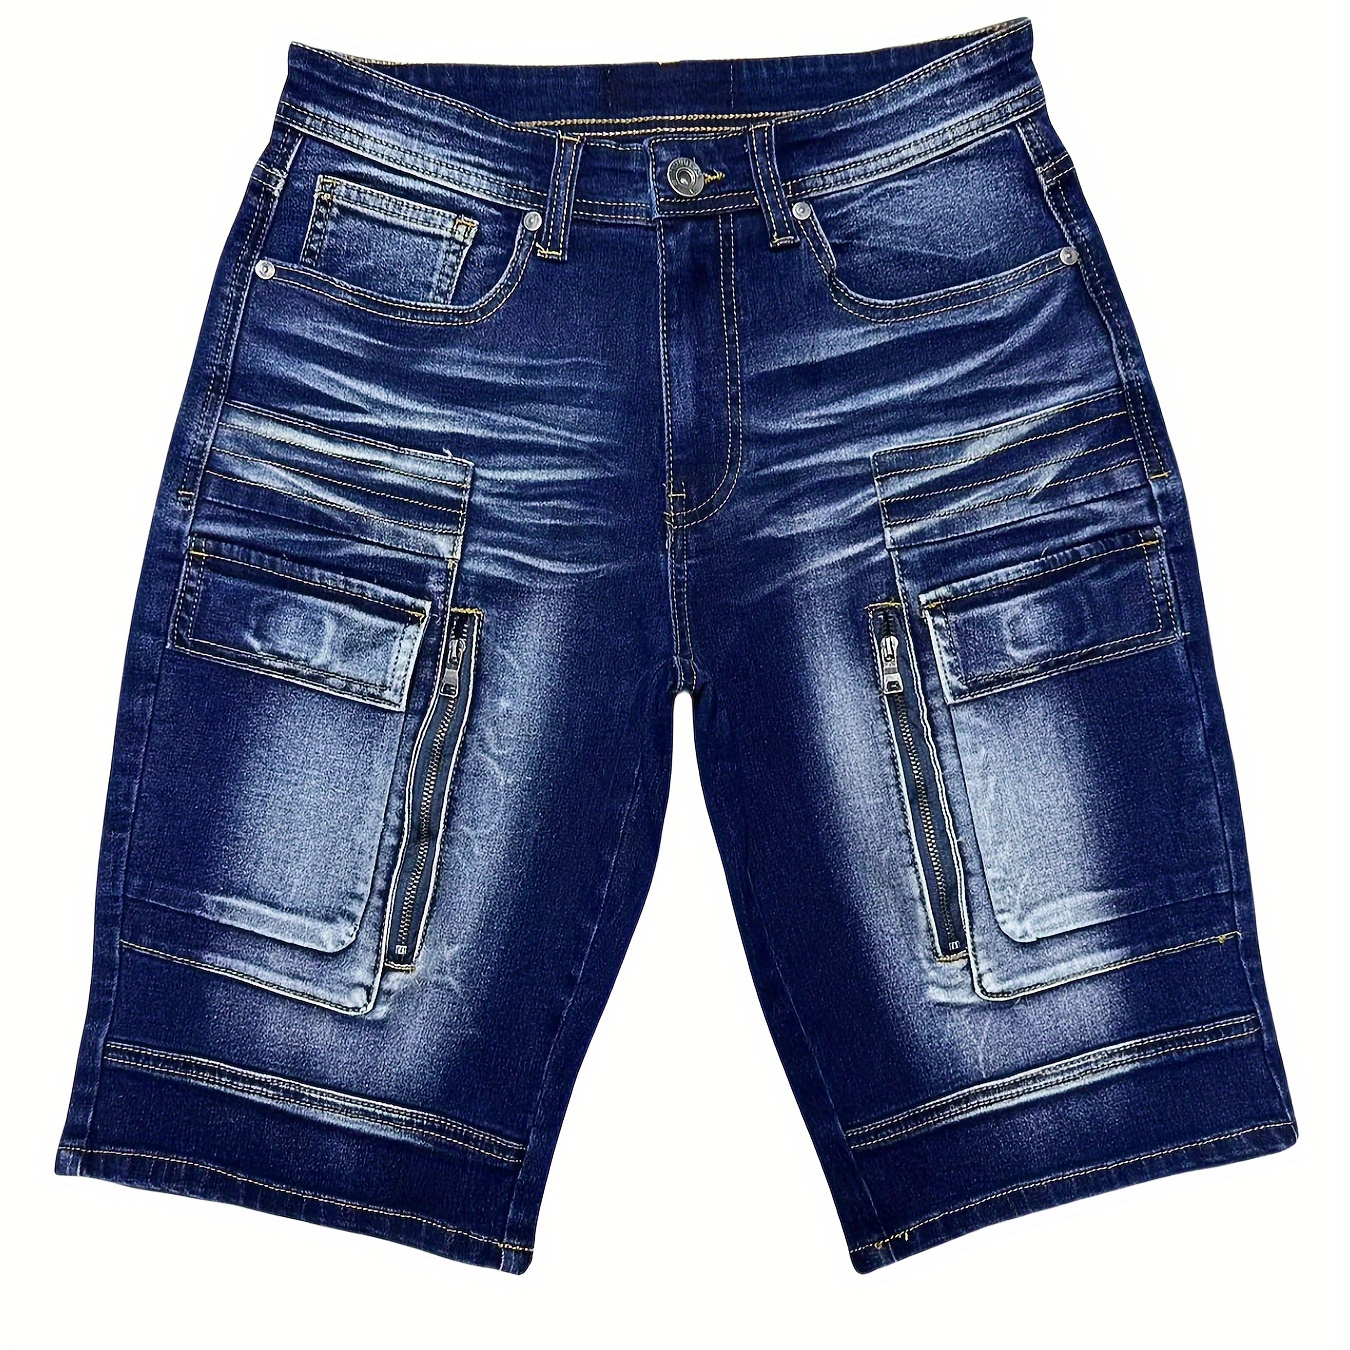 

Men's Fashion Denim Shorts, Classic Fit, Knee Length, Zippered Pockets, Casual Summer Jeans, E911818-mw-e5 Style